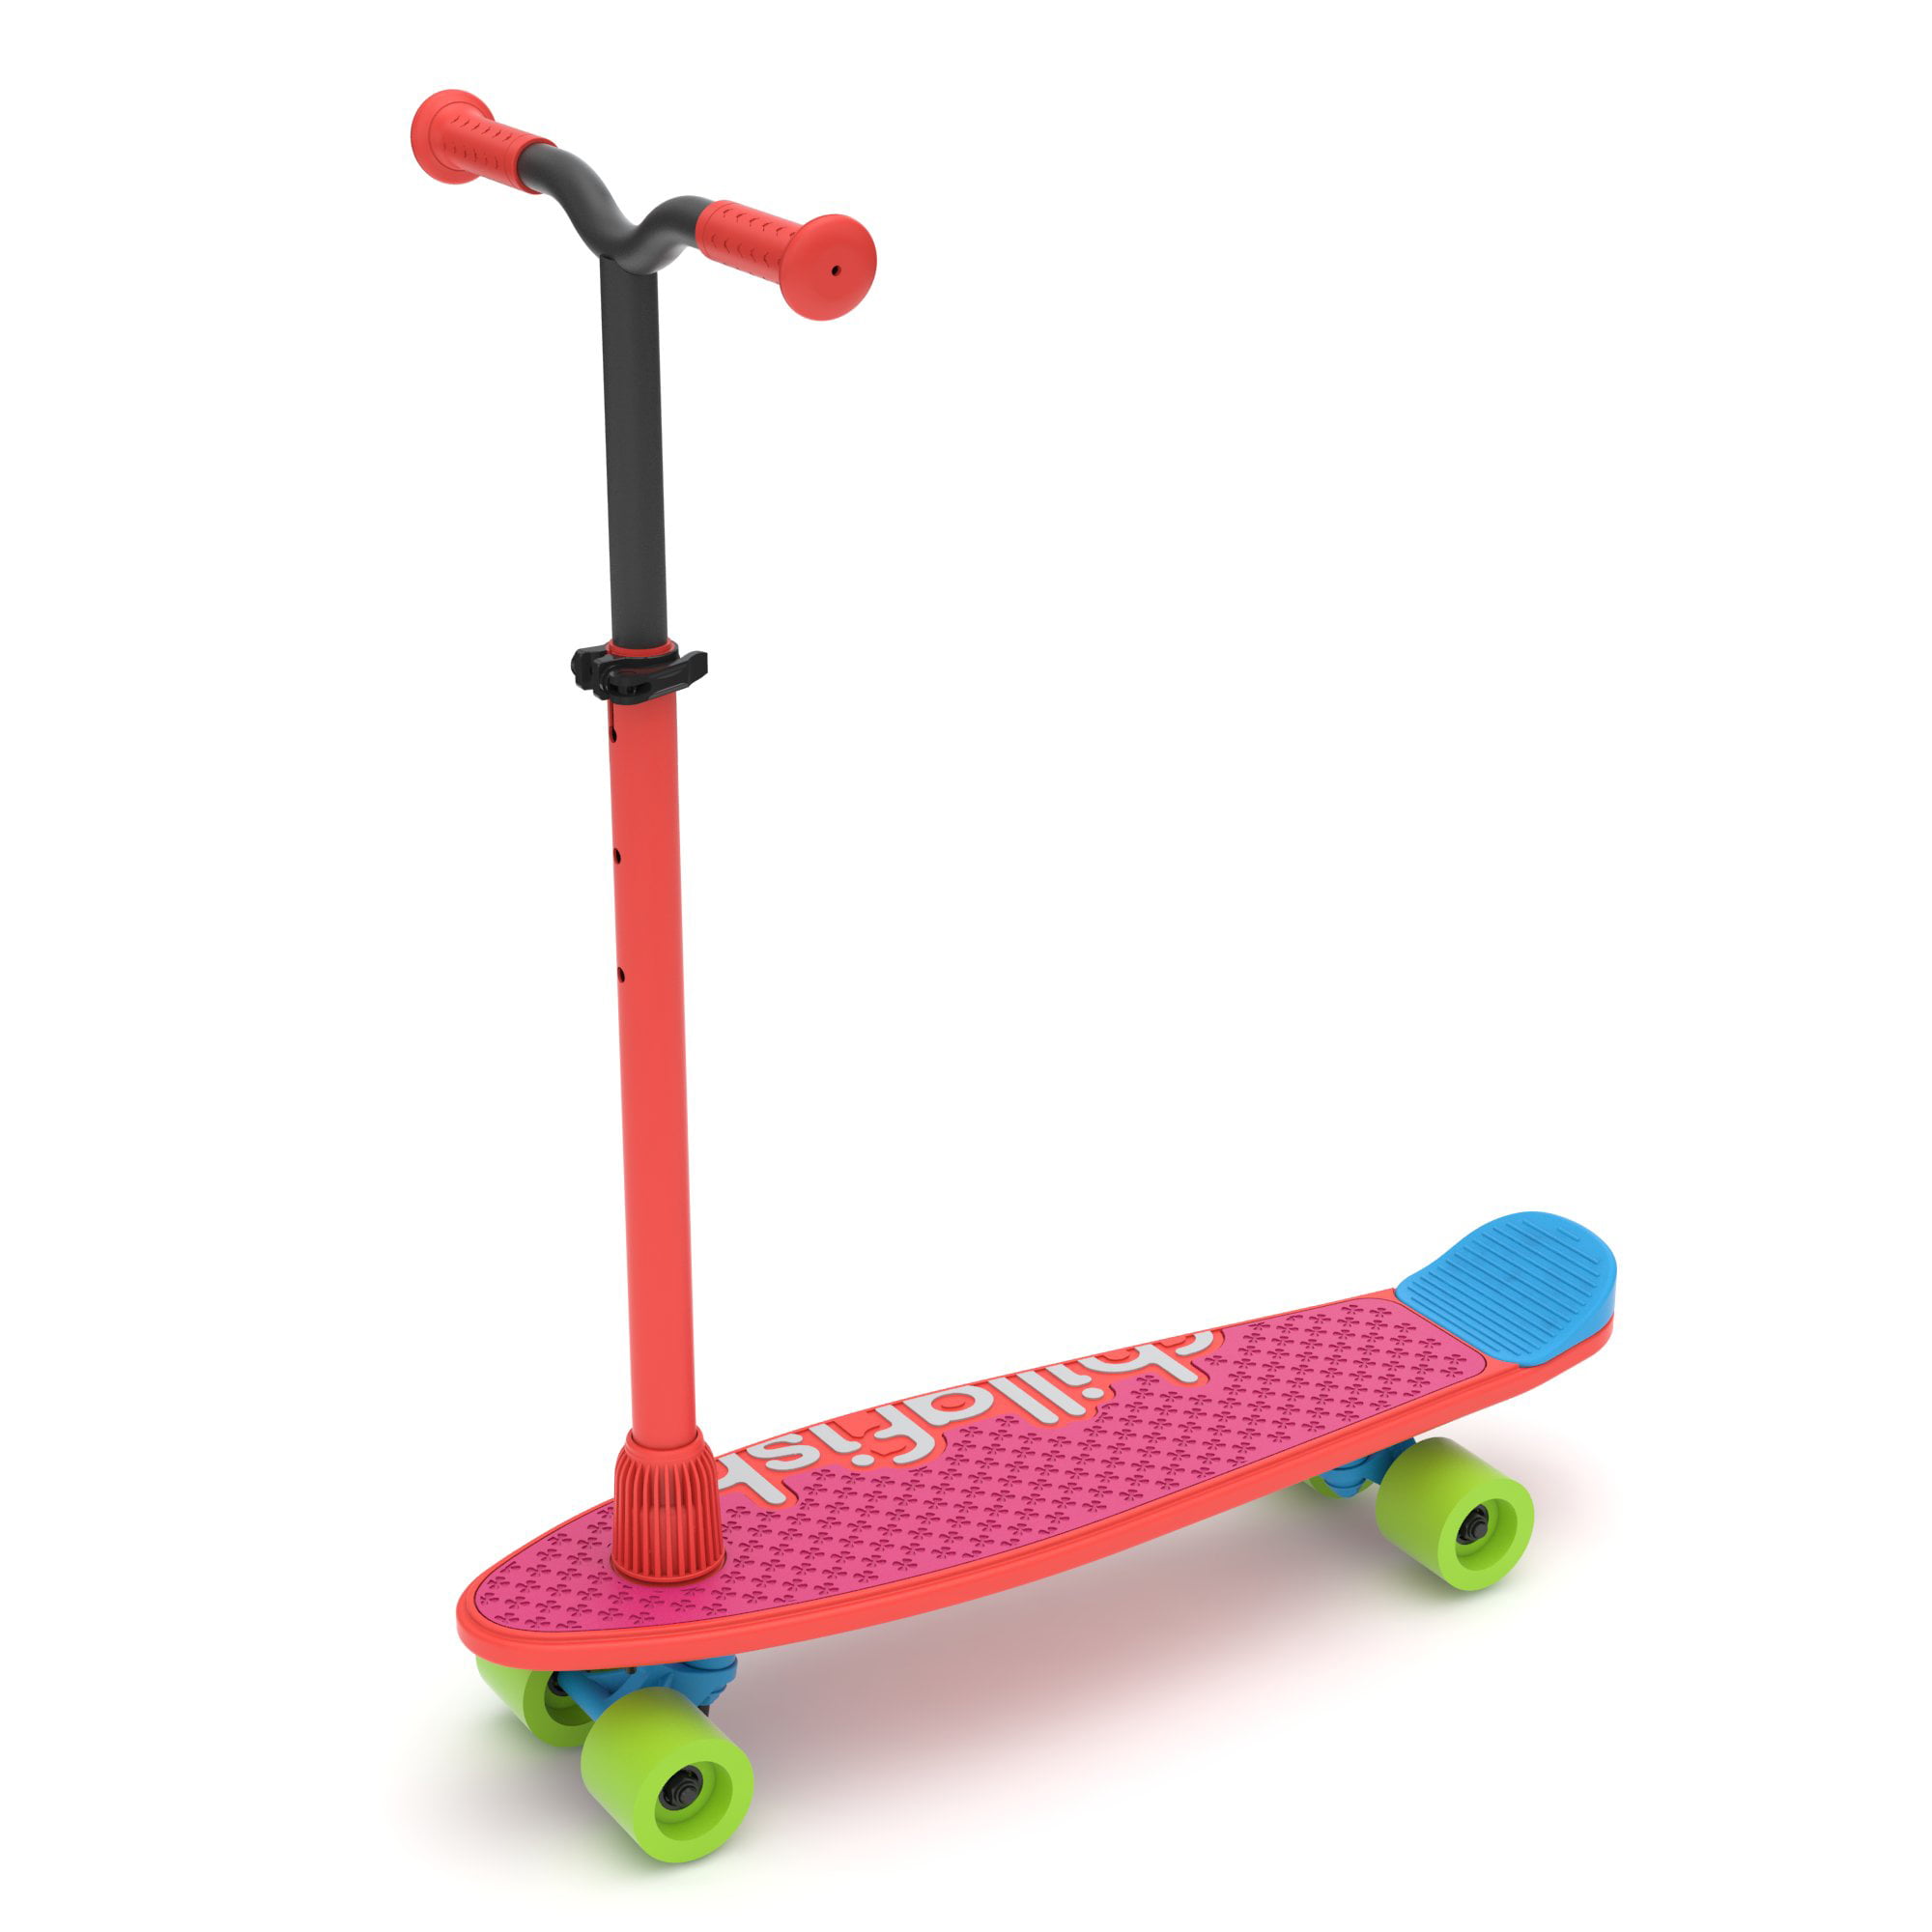 resultaat Vader Temmen Chillafish Skatieskootie, Beginner Skateboard Trainer or Scooter with  Detachable Handle for A Lean to Steer Scooter, Red Mix - Walmart.com